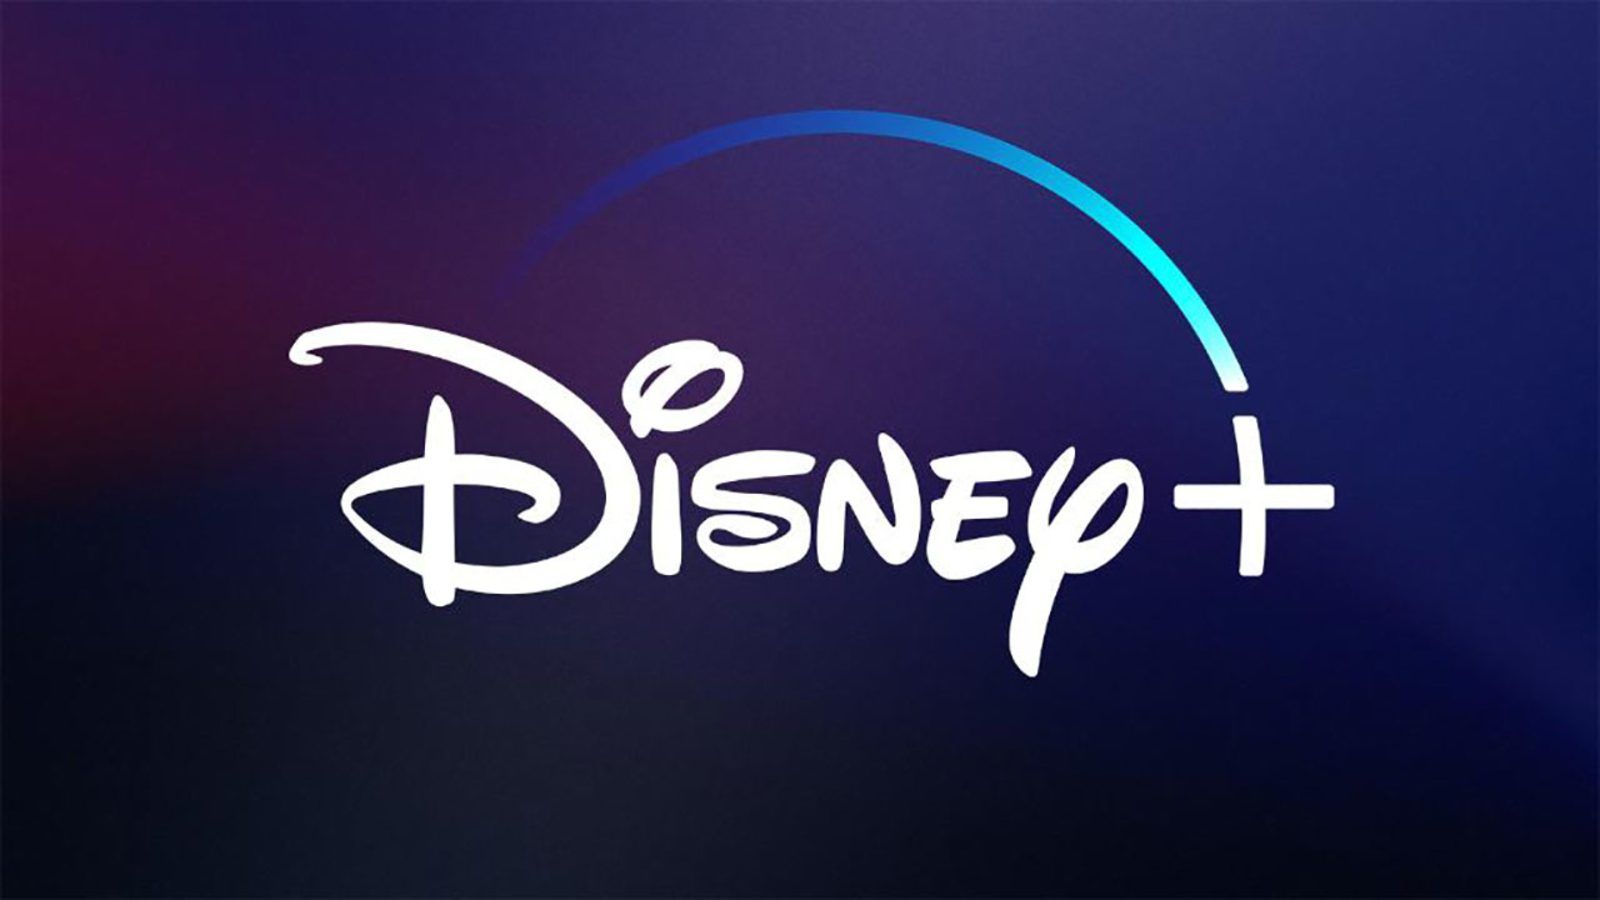 Major restructuring at Disney: Sean Bailey steps down as production president, David Greenbaum to lead newly combined live-action division